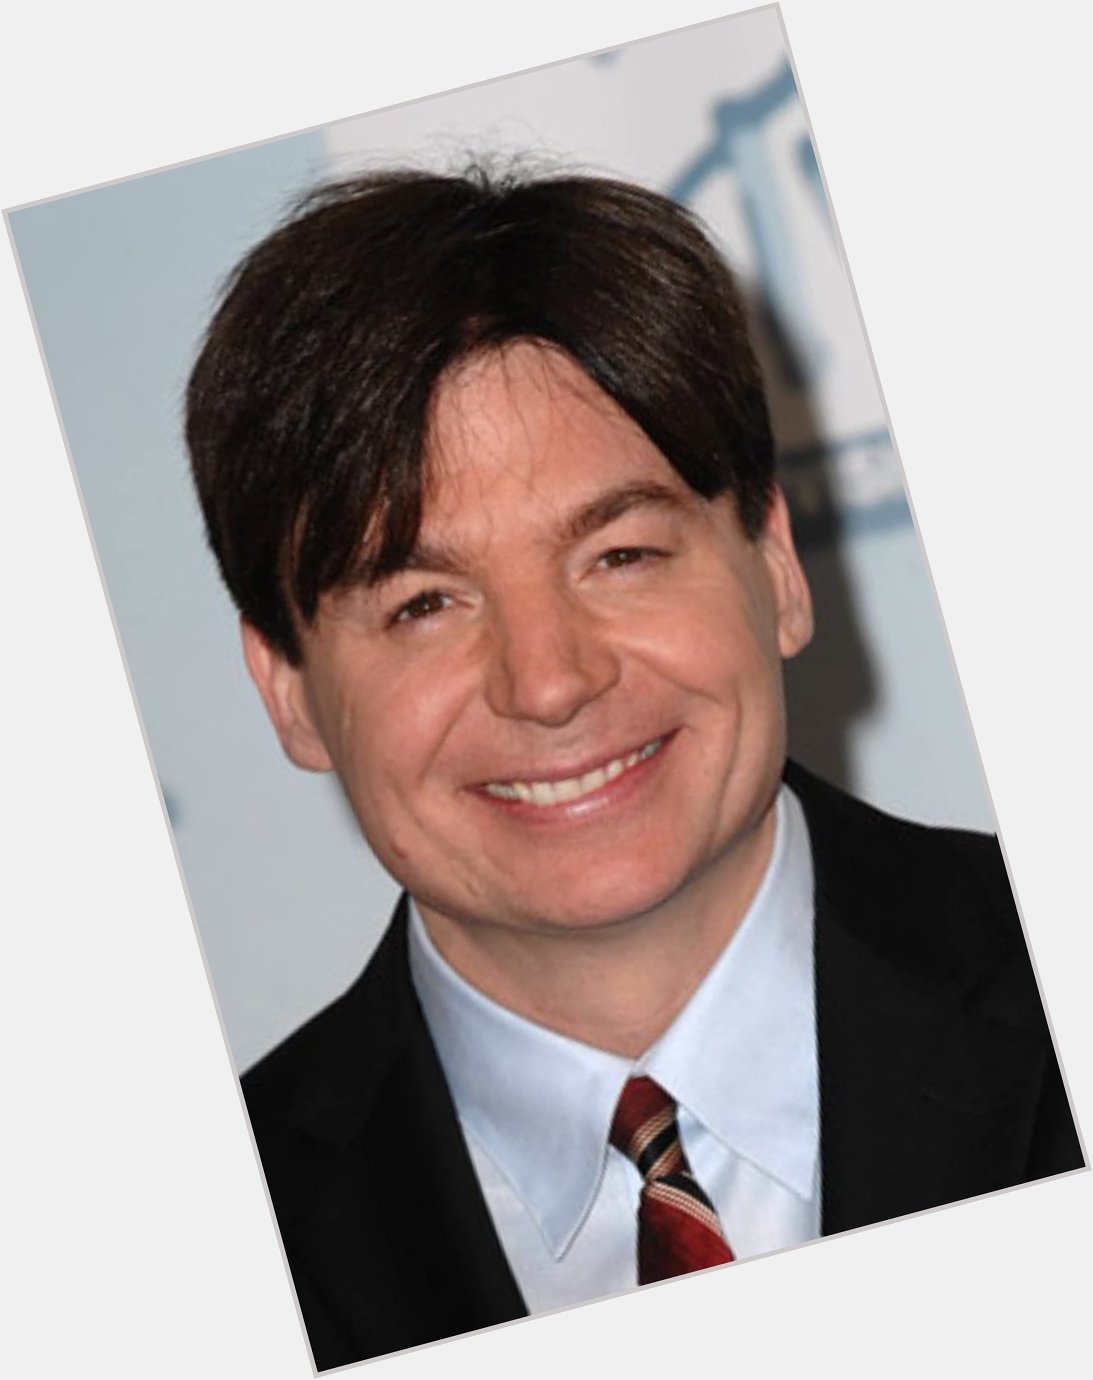 Happy 60th birthday to Mike Myers!

The actor who played Shrek, Cat in the Hat, and Austin Powers! 